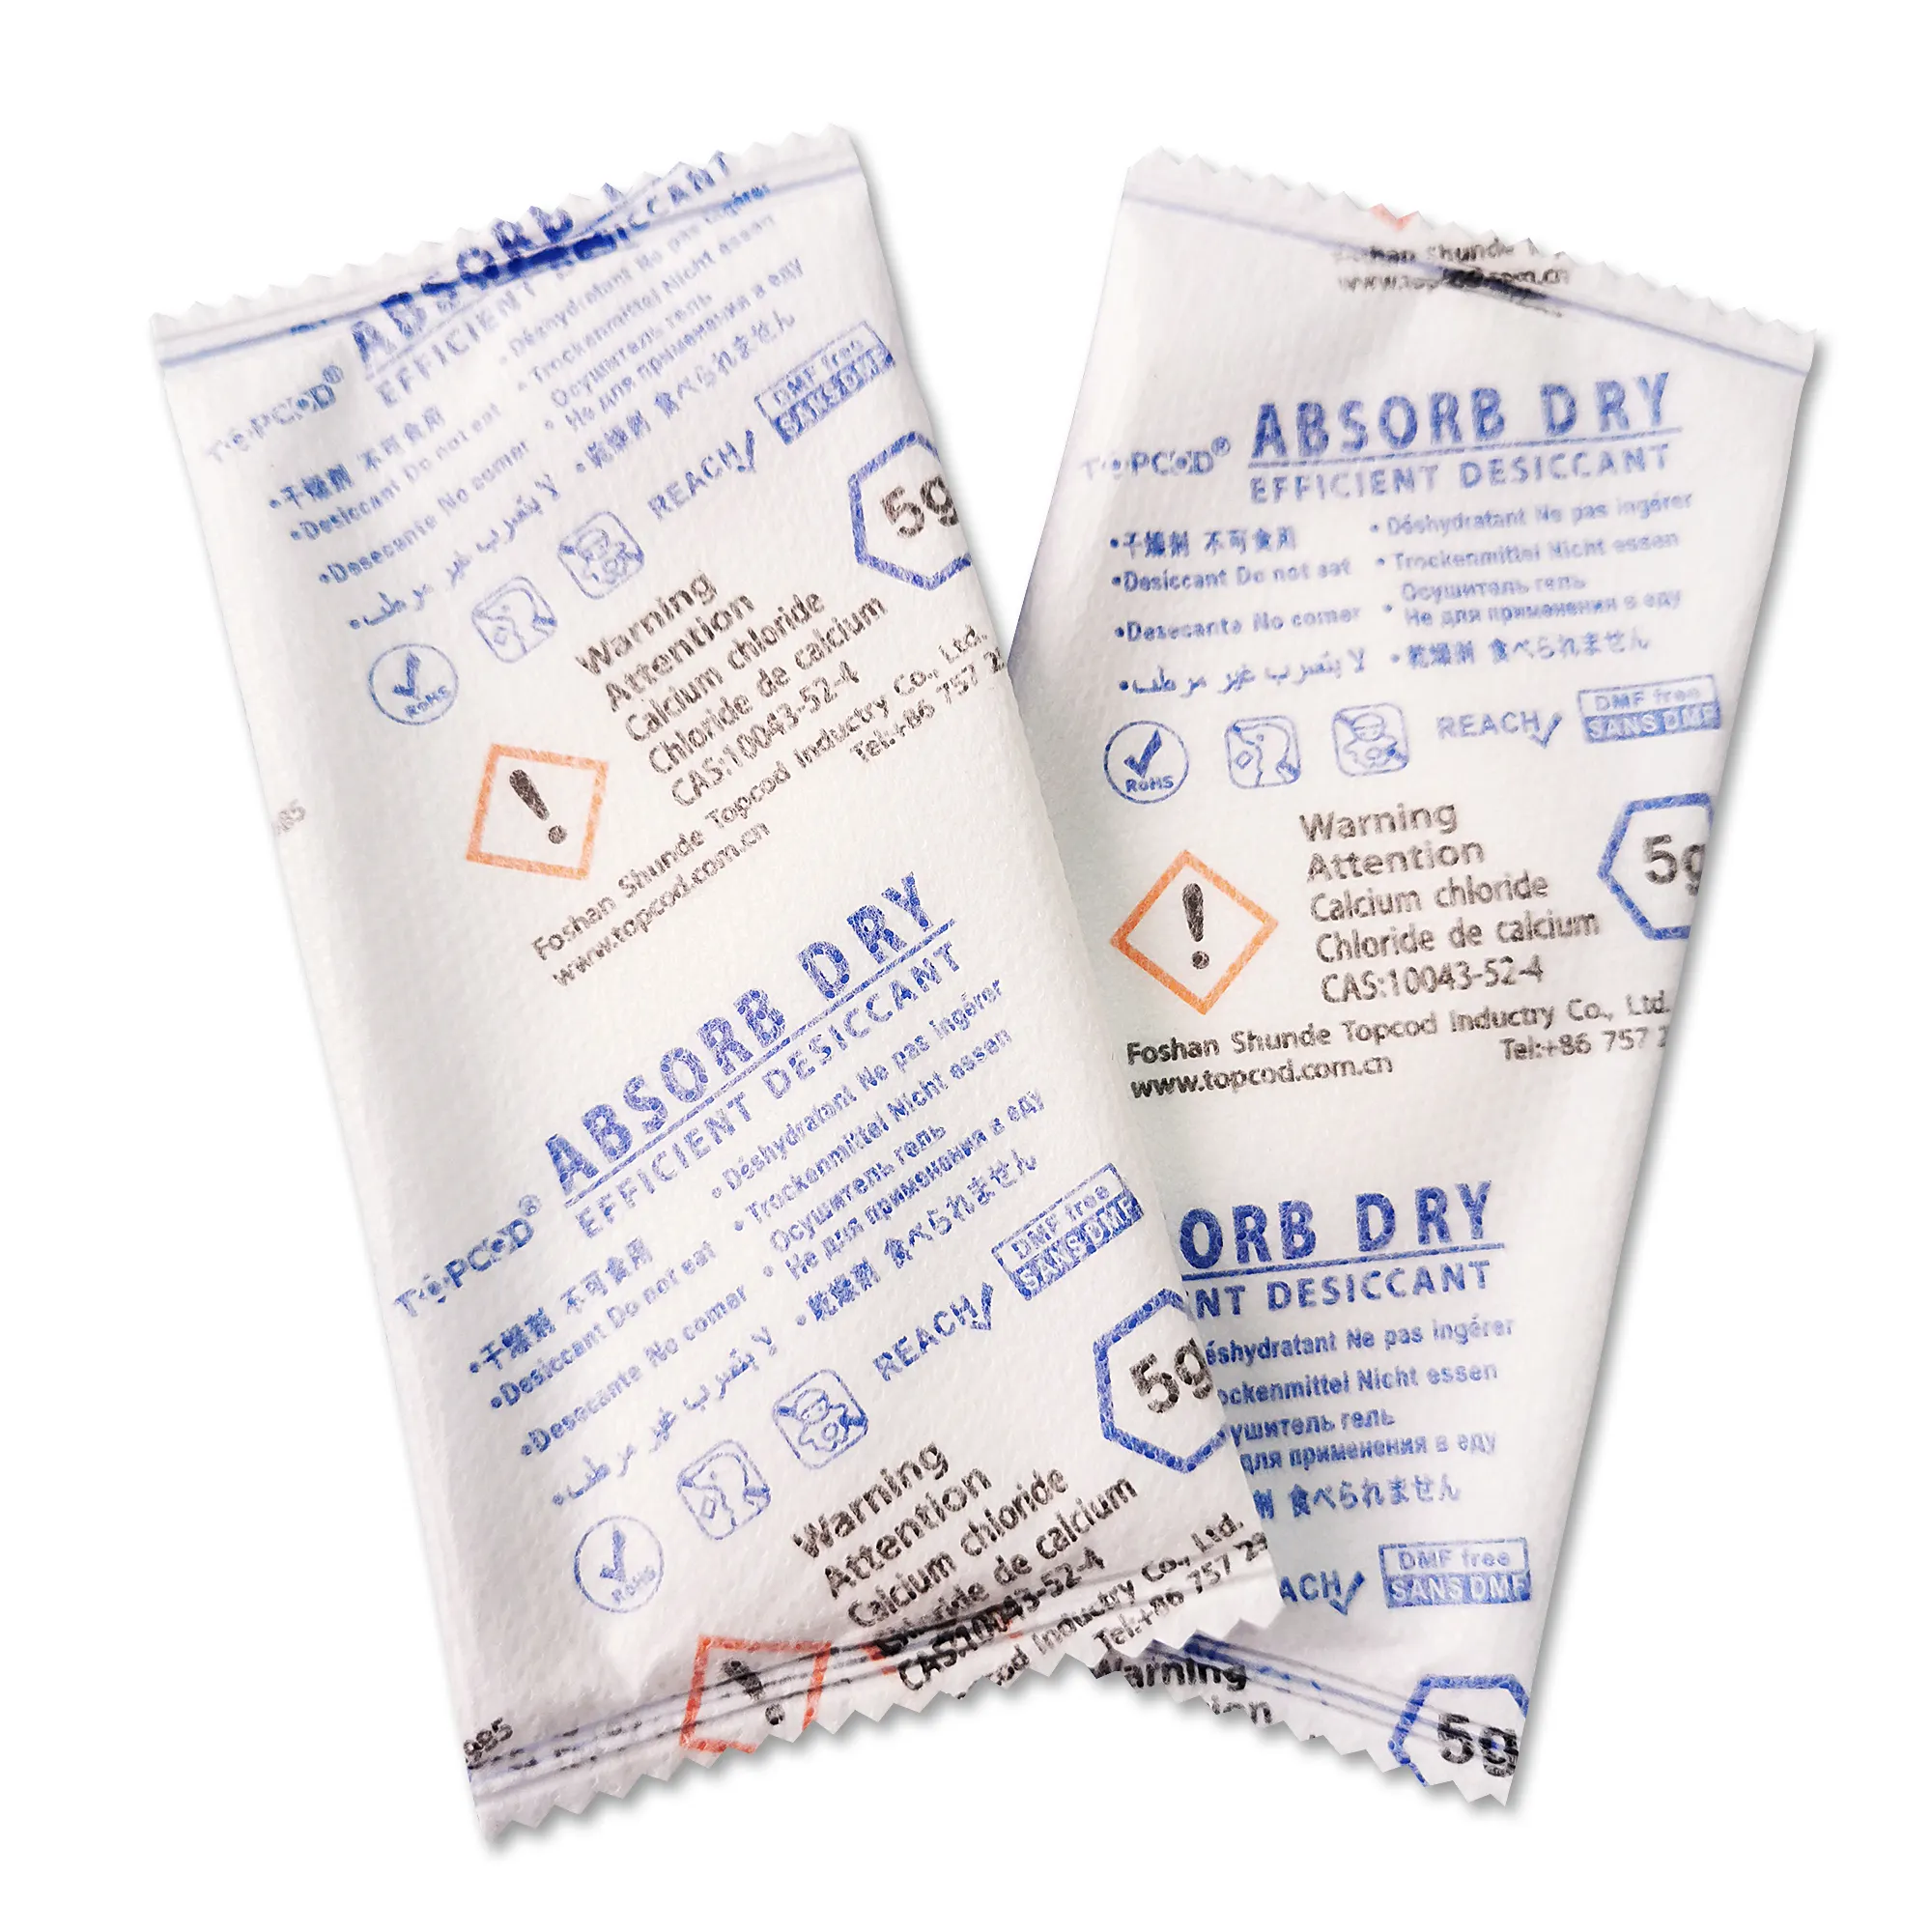 300% Moisture Absorption Capacity Calcium Chloride Desiccant Sachets Used for Garment Packing Super Dry Desiccant Pack